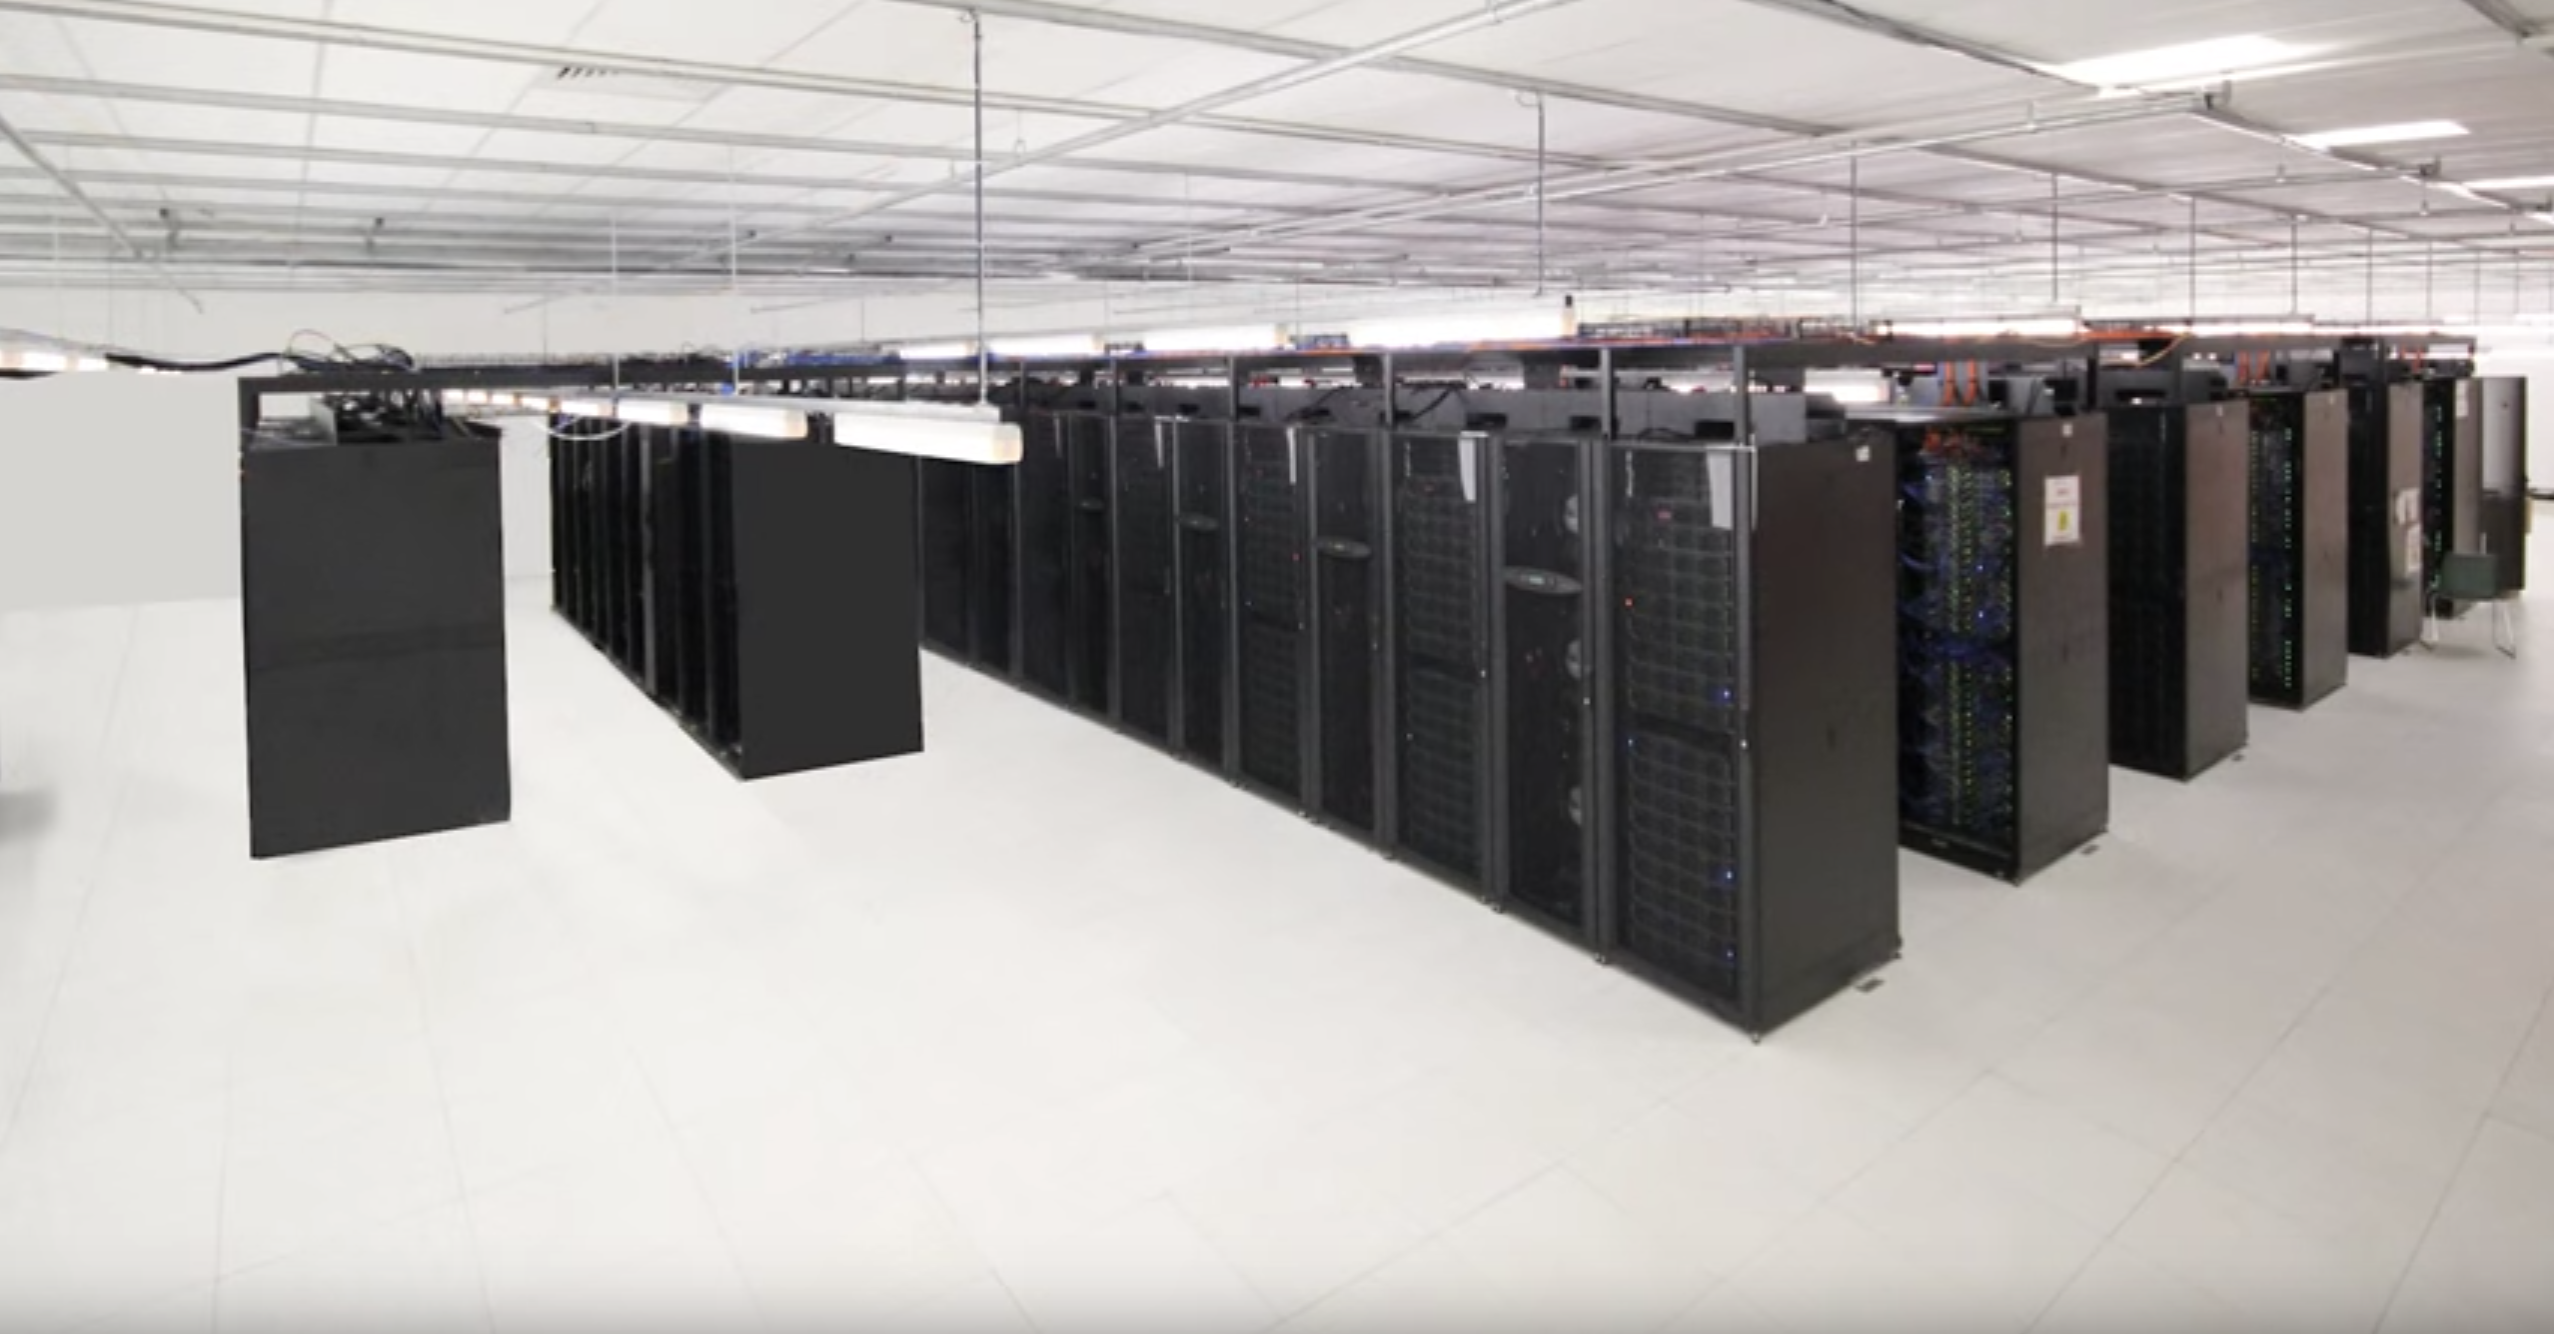 Construction of the NCI Supercomputer – Time lapse video